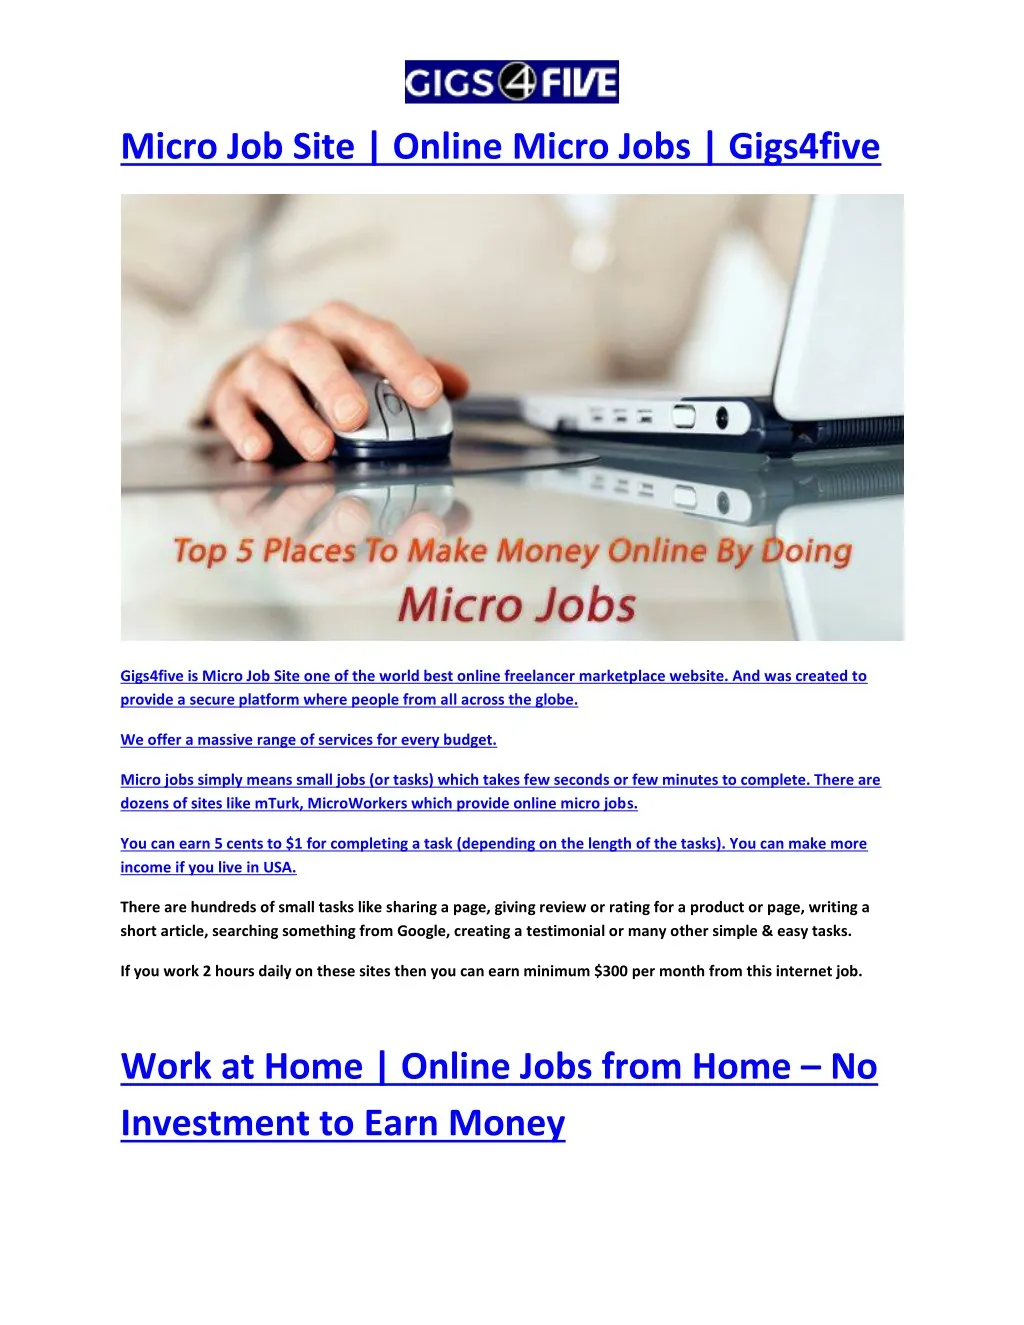 Ppt Work At Home Online Jobs From Home No Investment - 